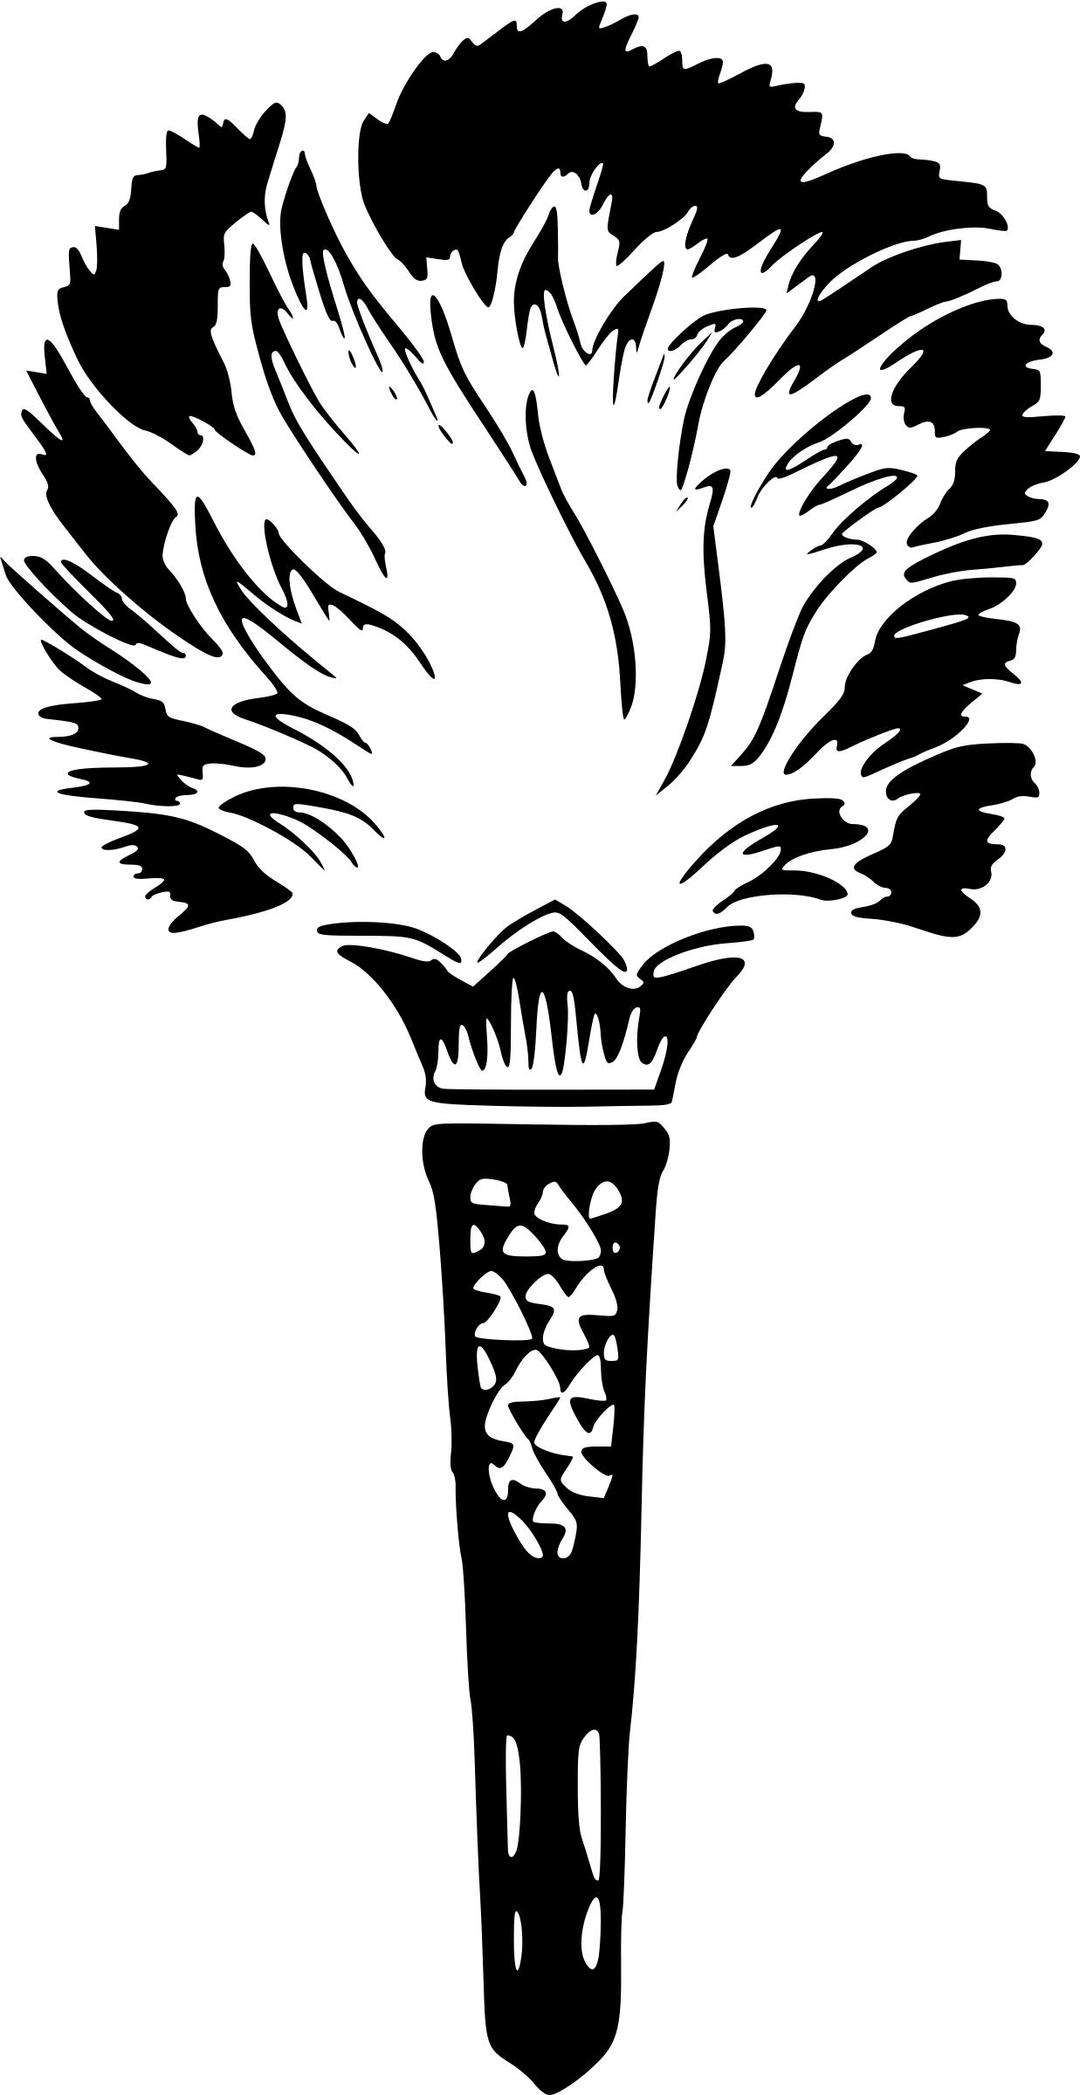 Torch silhouette png transparent